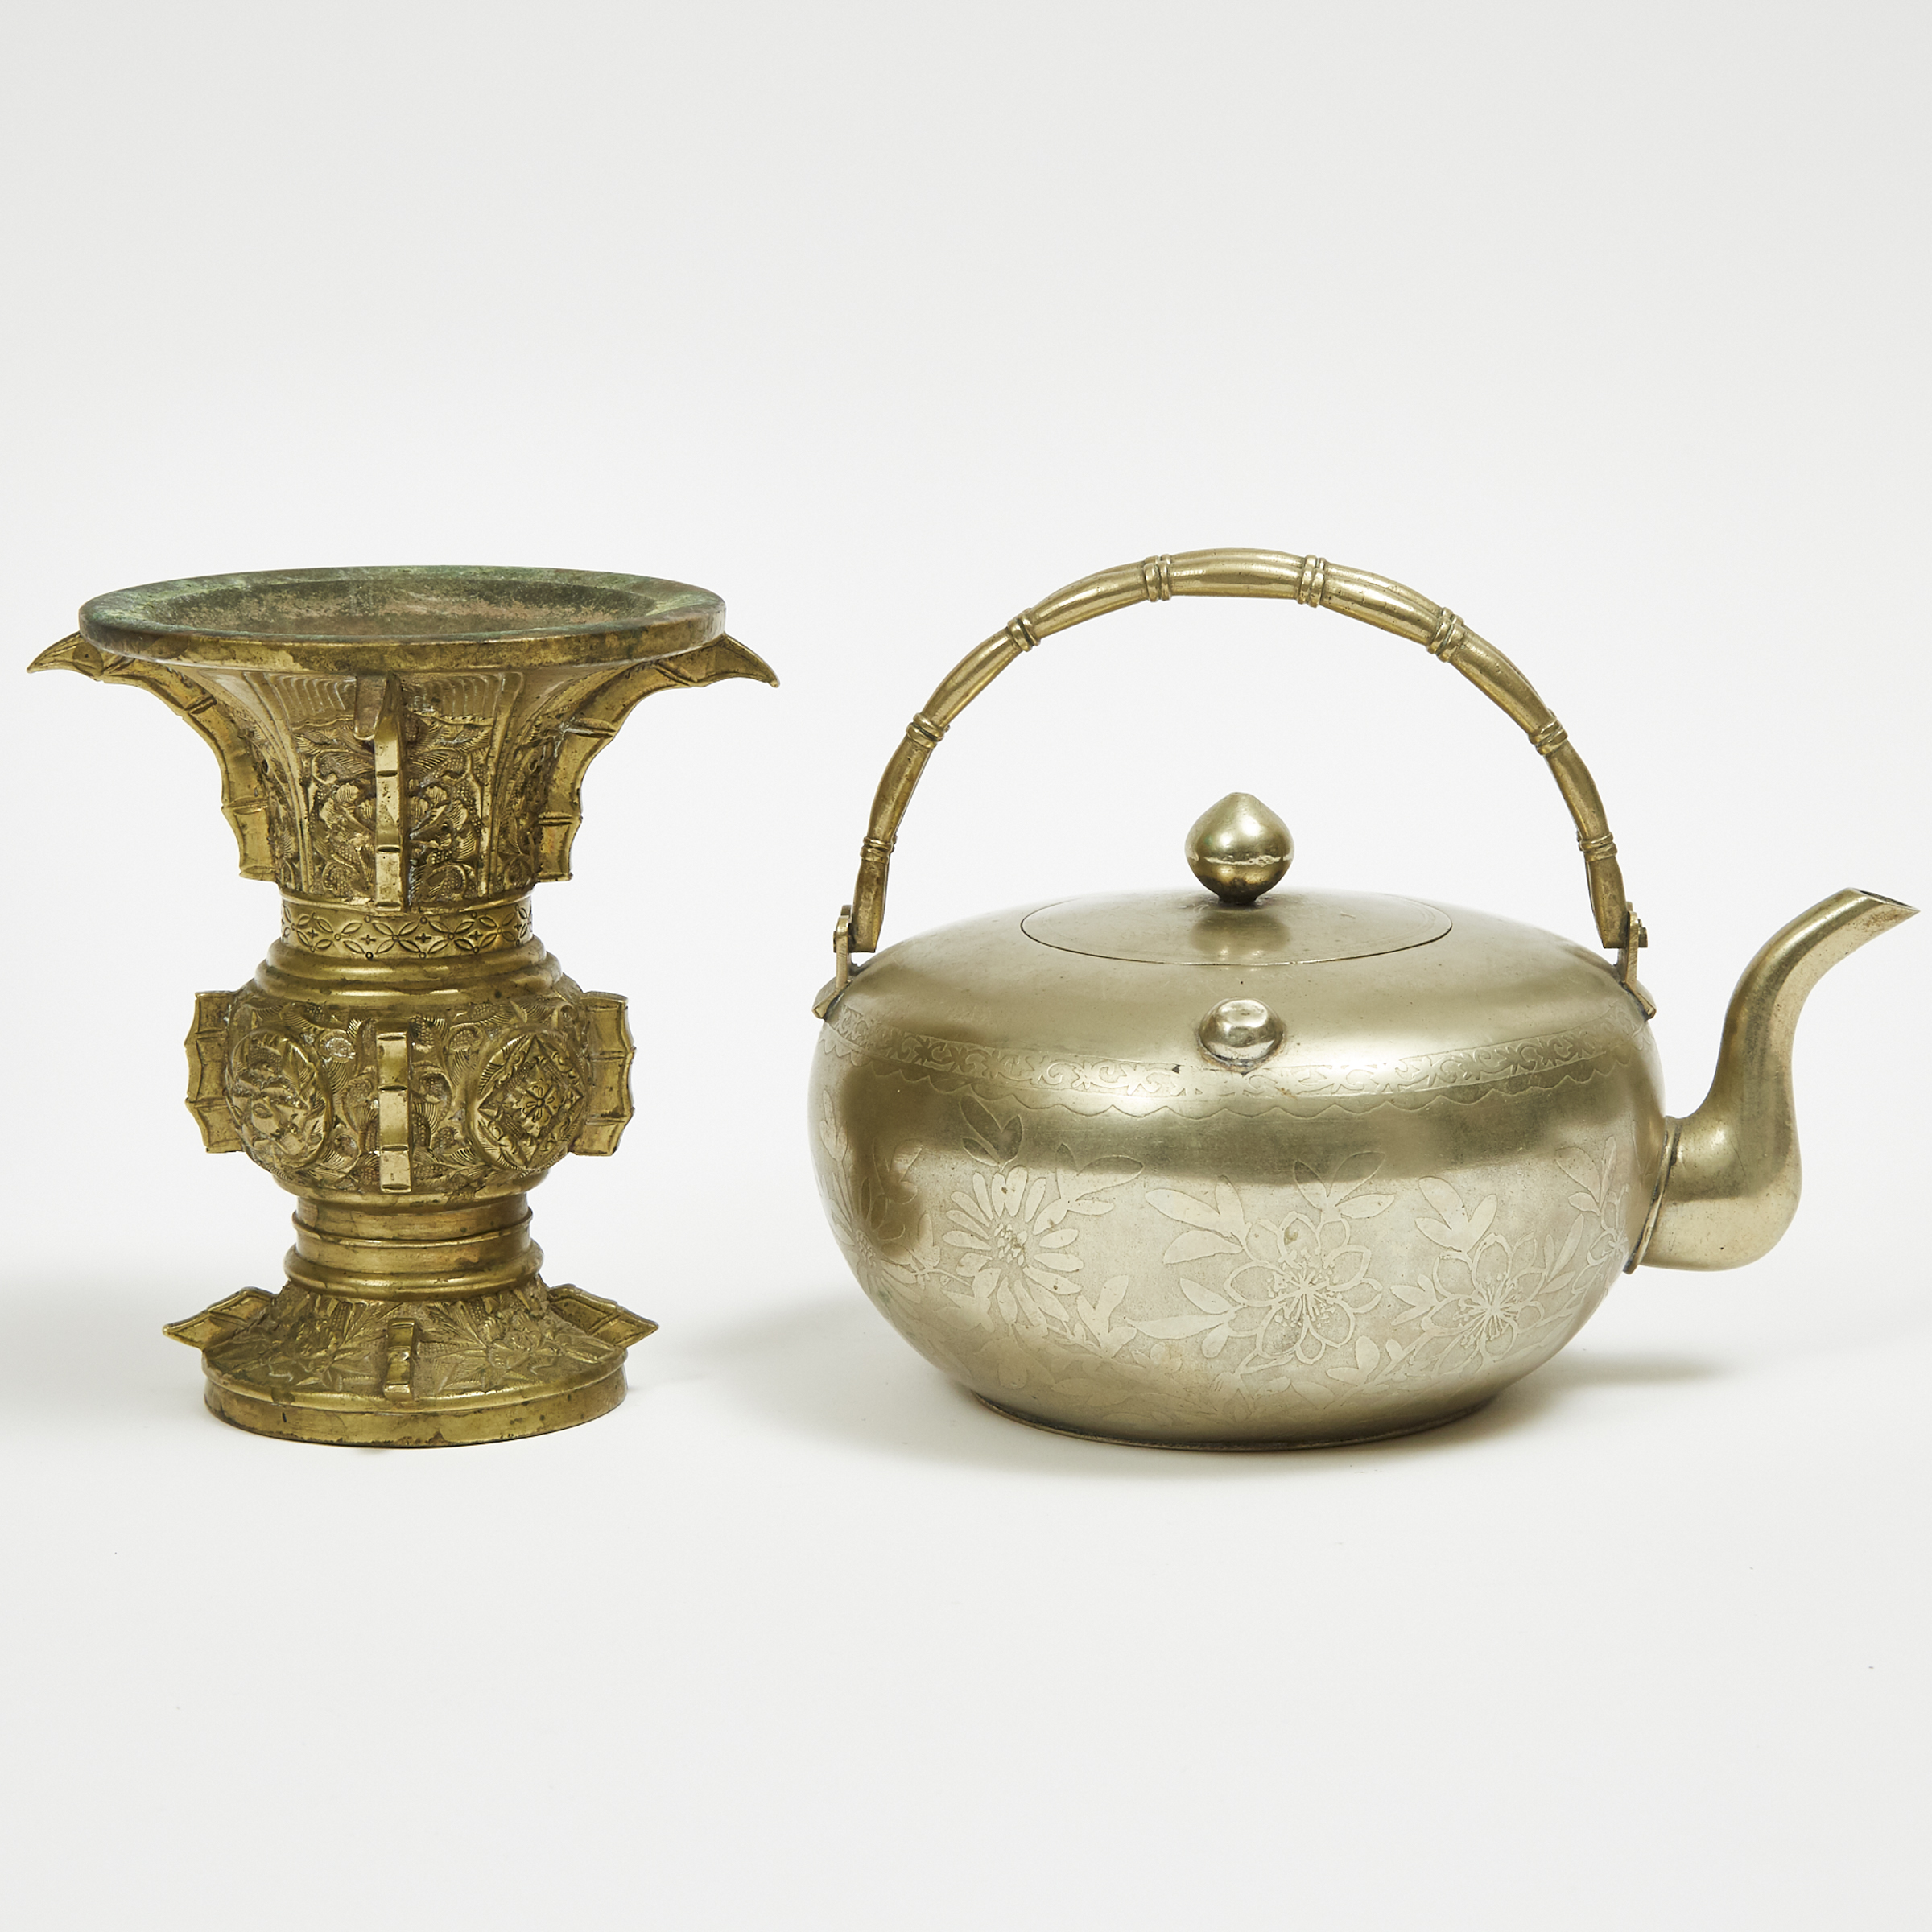 A Small Bronze 'Gu' Vase, together with a Metal Teapot with Incised Flowers and Calligraphy Decoration, 20th Century 